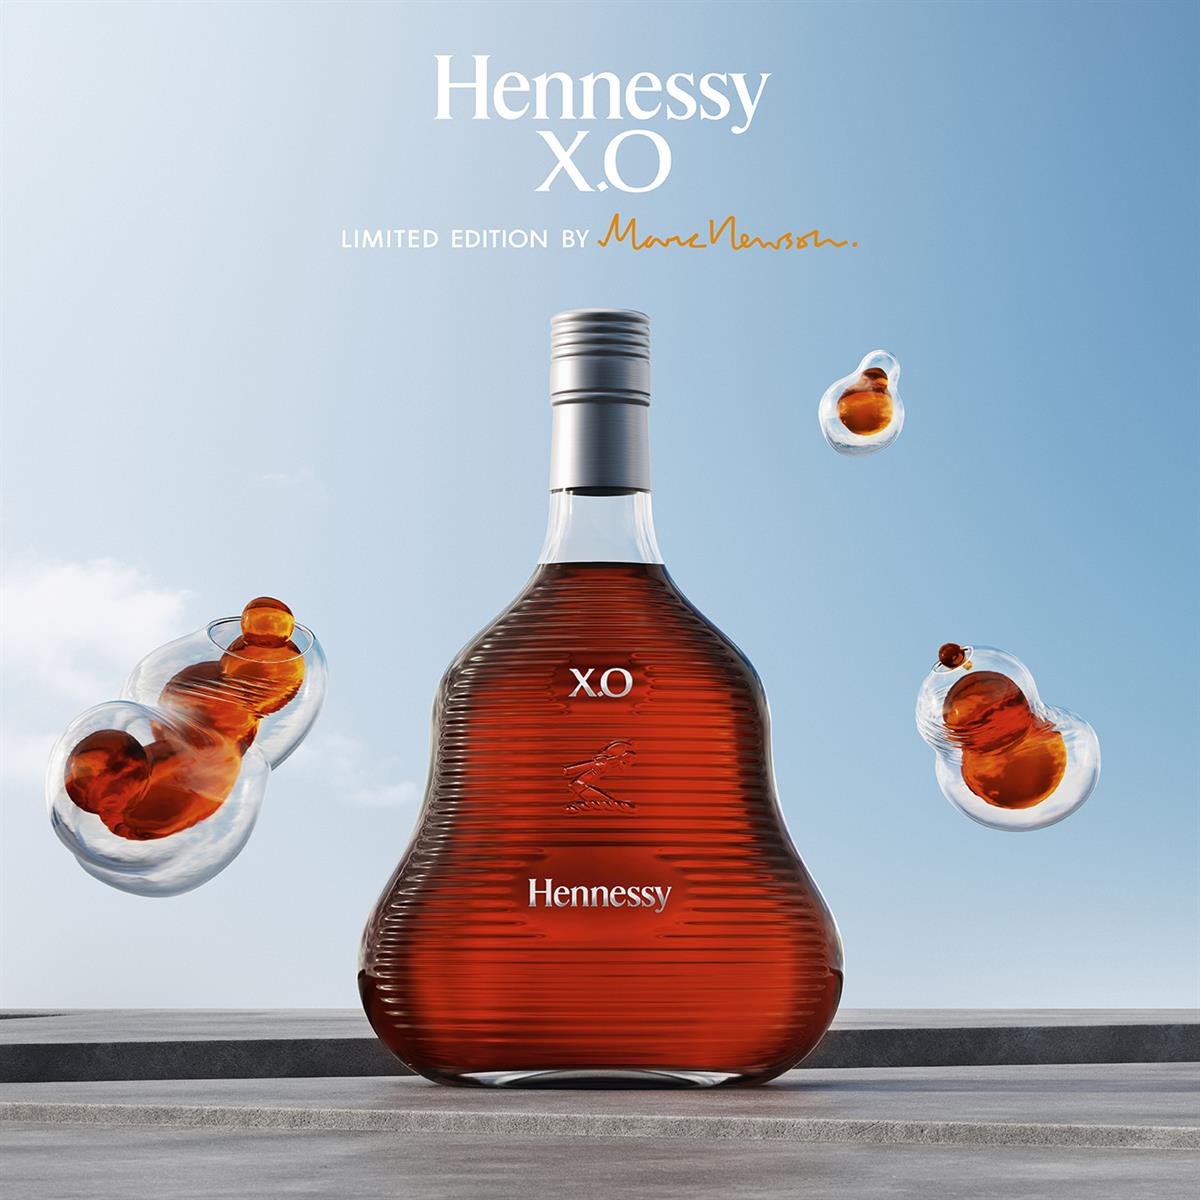 04 Hennessy X.O 2017 - Limited Edition by Marc Newson